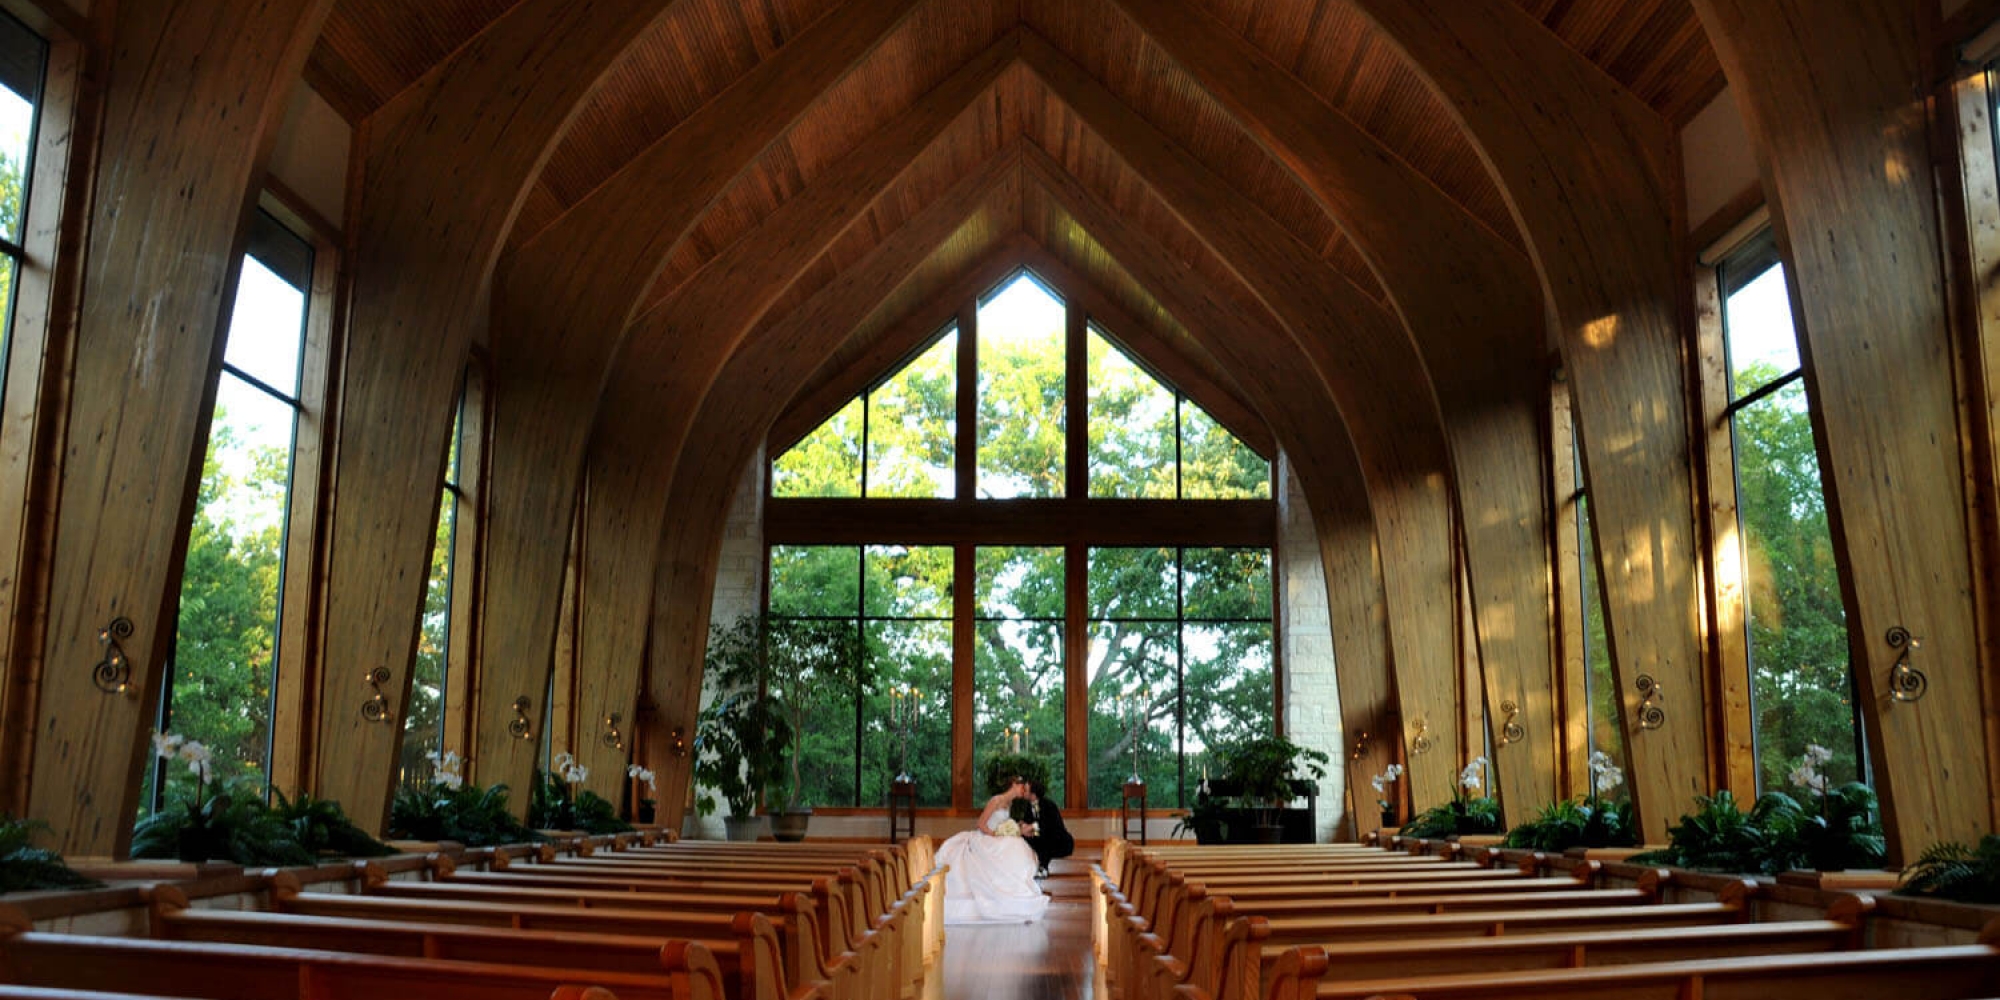 Thunderbird Chapel | Outdoor beauty without the worries!